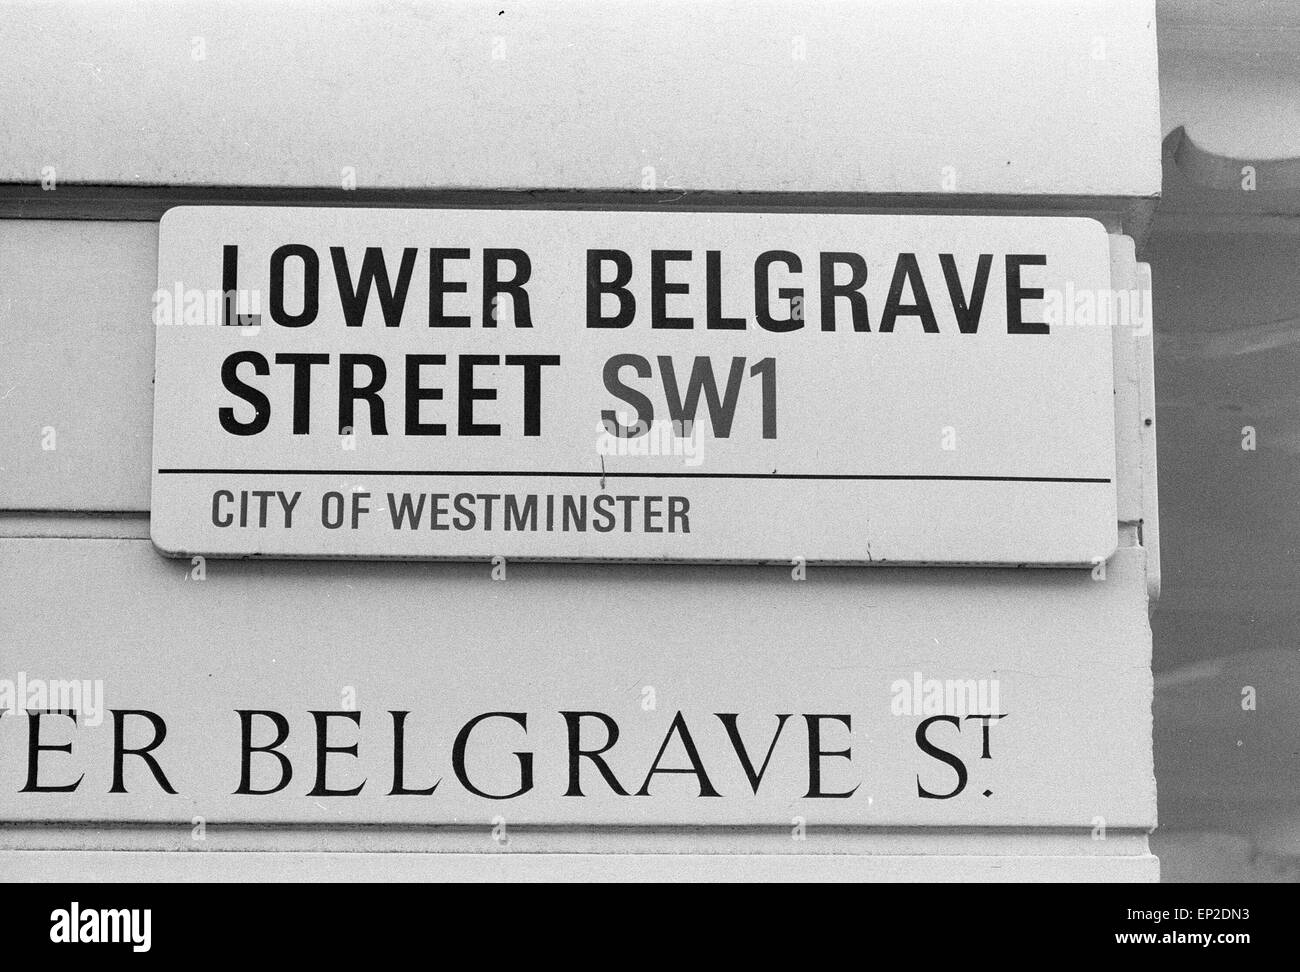 Sandra Rivett Murder November 1974. Pictured: ower Belgrave Street SW1 London where - estranged wife - Lady Lucan and children lived. Richard John Bingham 7th Earl of Lucan popularly known as Lord Lucan was British peer who disappeared in the early hours of 8 November 1974 following the murder of Sandra Rivett his children's nanny the previous evening. There has been no verified sighting of him since then. On 19th June 1975 an inquest jury named Lucan as the murderer of Sandra Rivett. He was presumed deceased in chambers on 11th December 1992 and declared legally dead in October 1999. Stock Photo